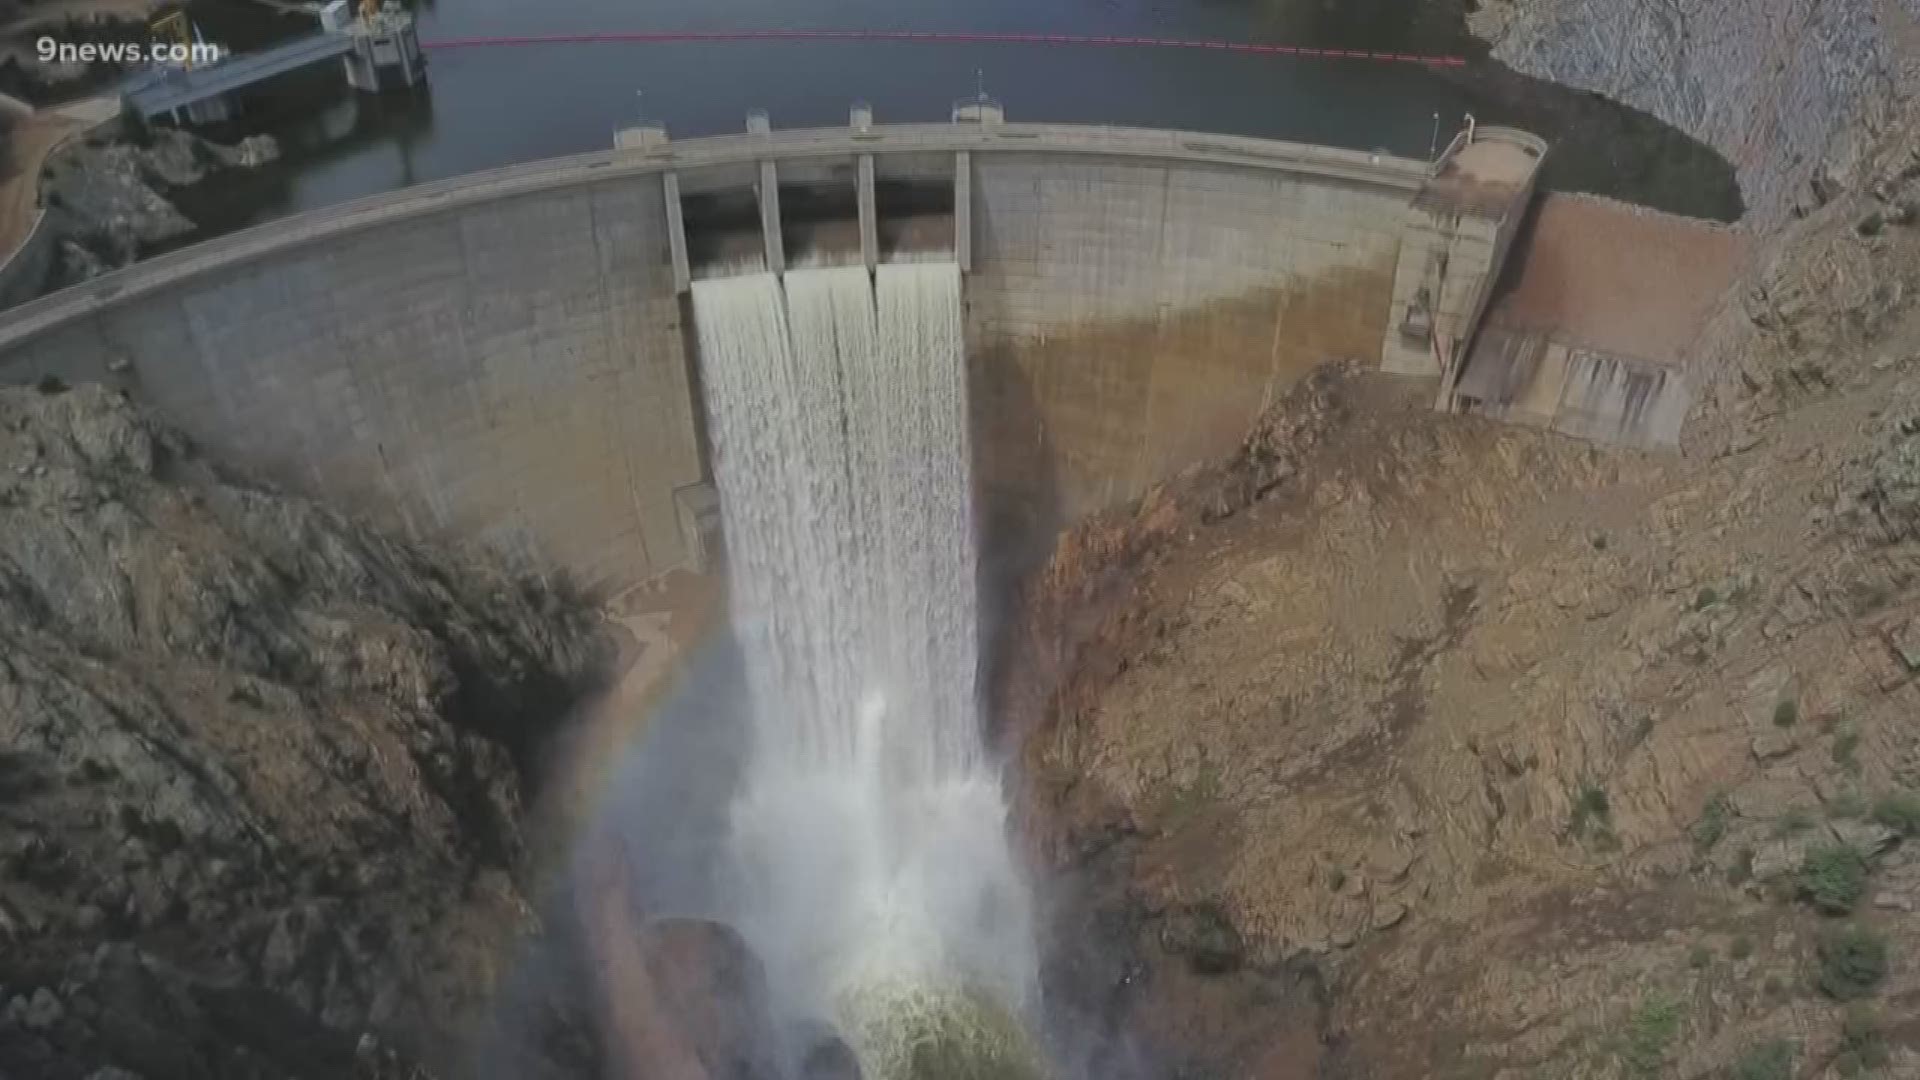 The Dam at Strontia Springs is spilling over and more for June 19, 2019.